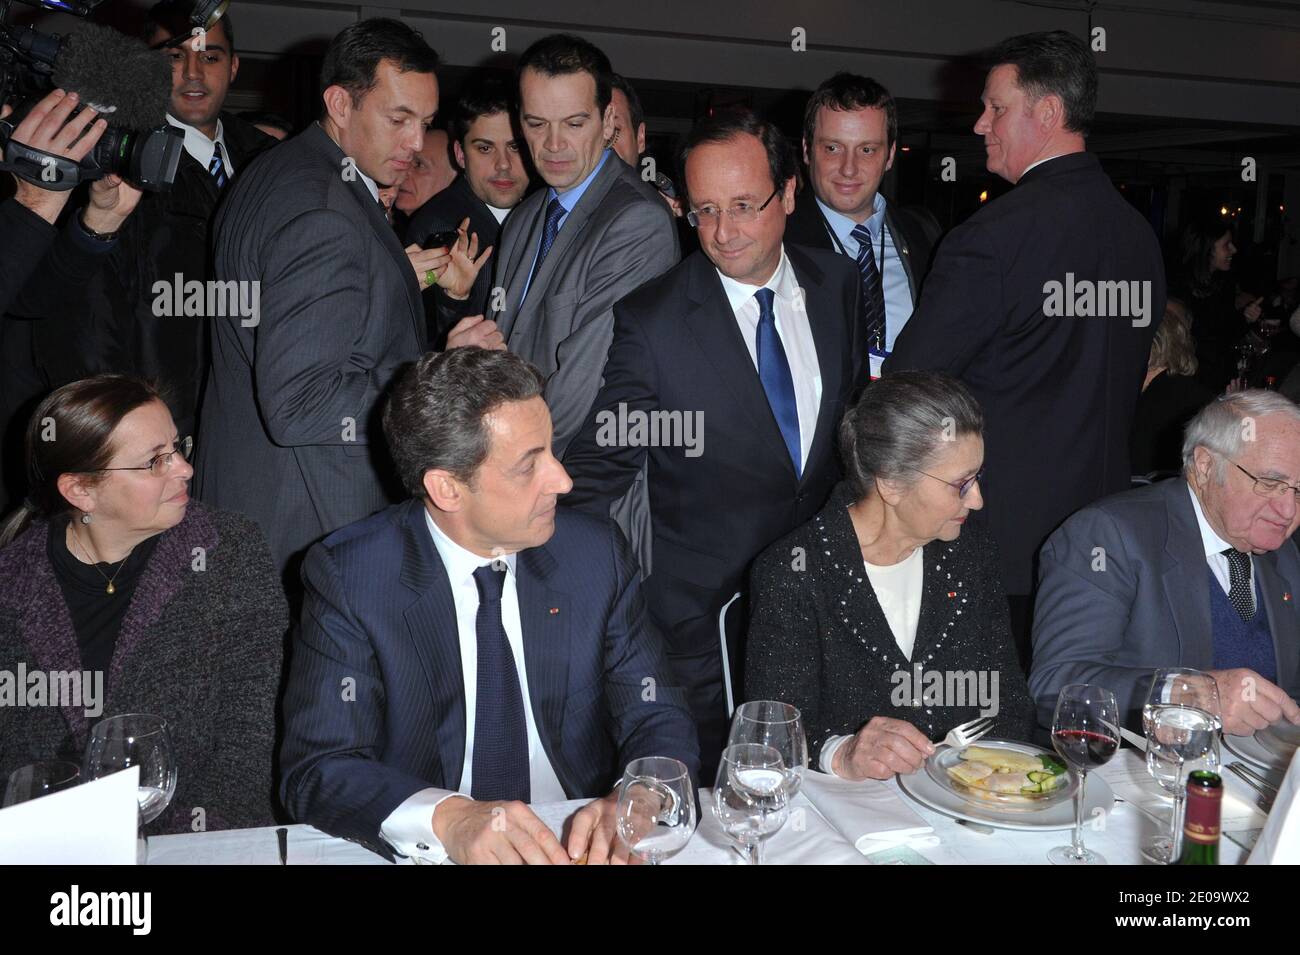 Socialist Party candidate for the 2012 French presidential election Francois Hollande arrives to speak with French President Nicolas Sarkozy as he sits near Aviva Shalit, Simone and Antoine Veil during the 'CRIF' (French Jewish community representative council) annual dinner, held at Pavillon d'Armenonville, in Paris, France on February 8, 2012. Photo by Christophe Guibbaud/ABACAPRESS.COM Stock Photo